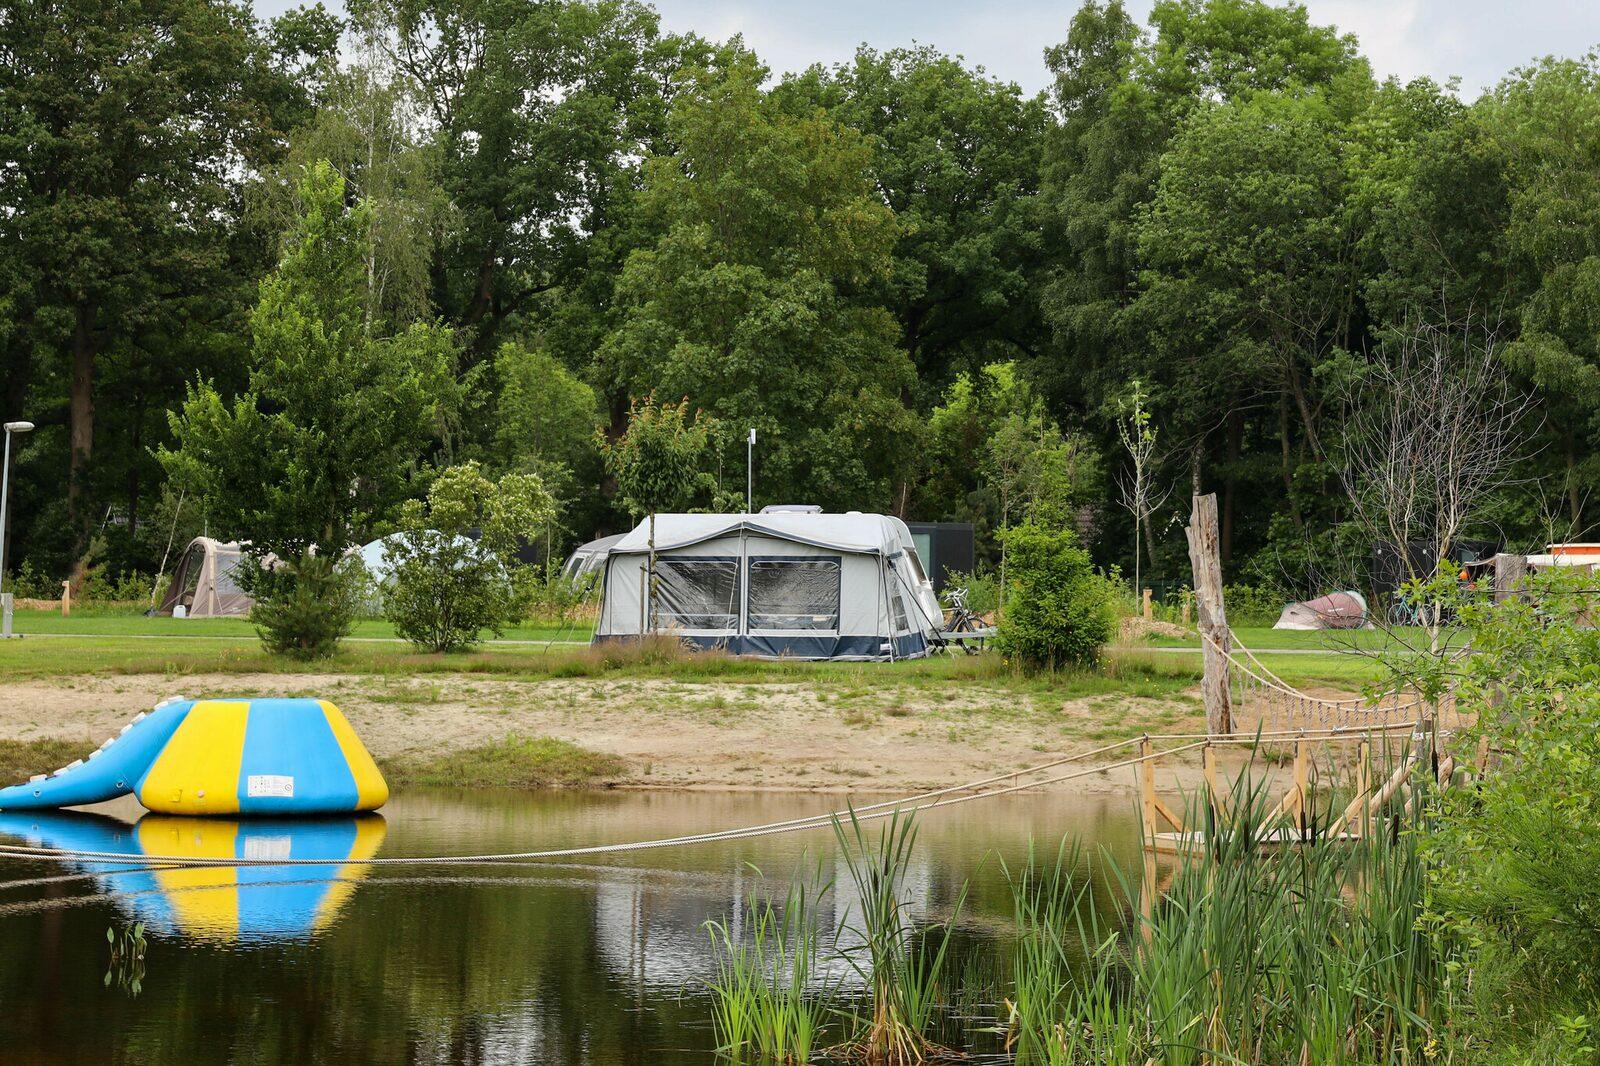 Camping pitch, on the water